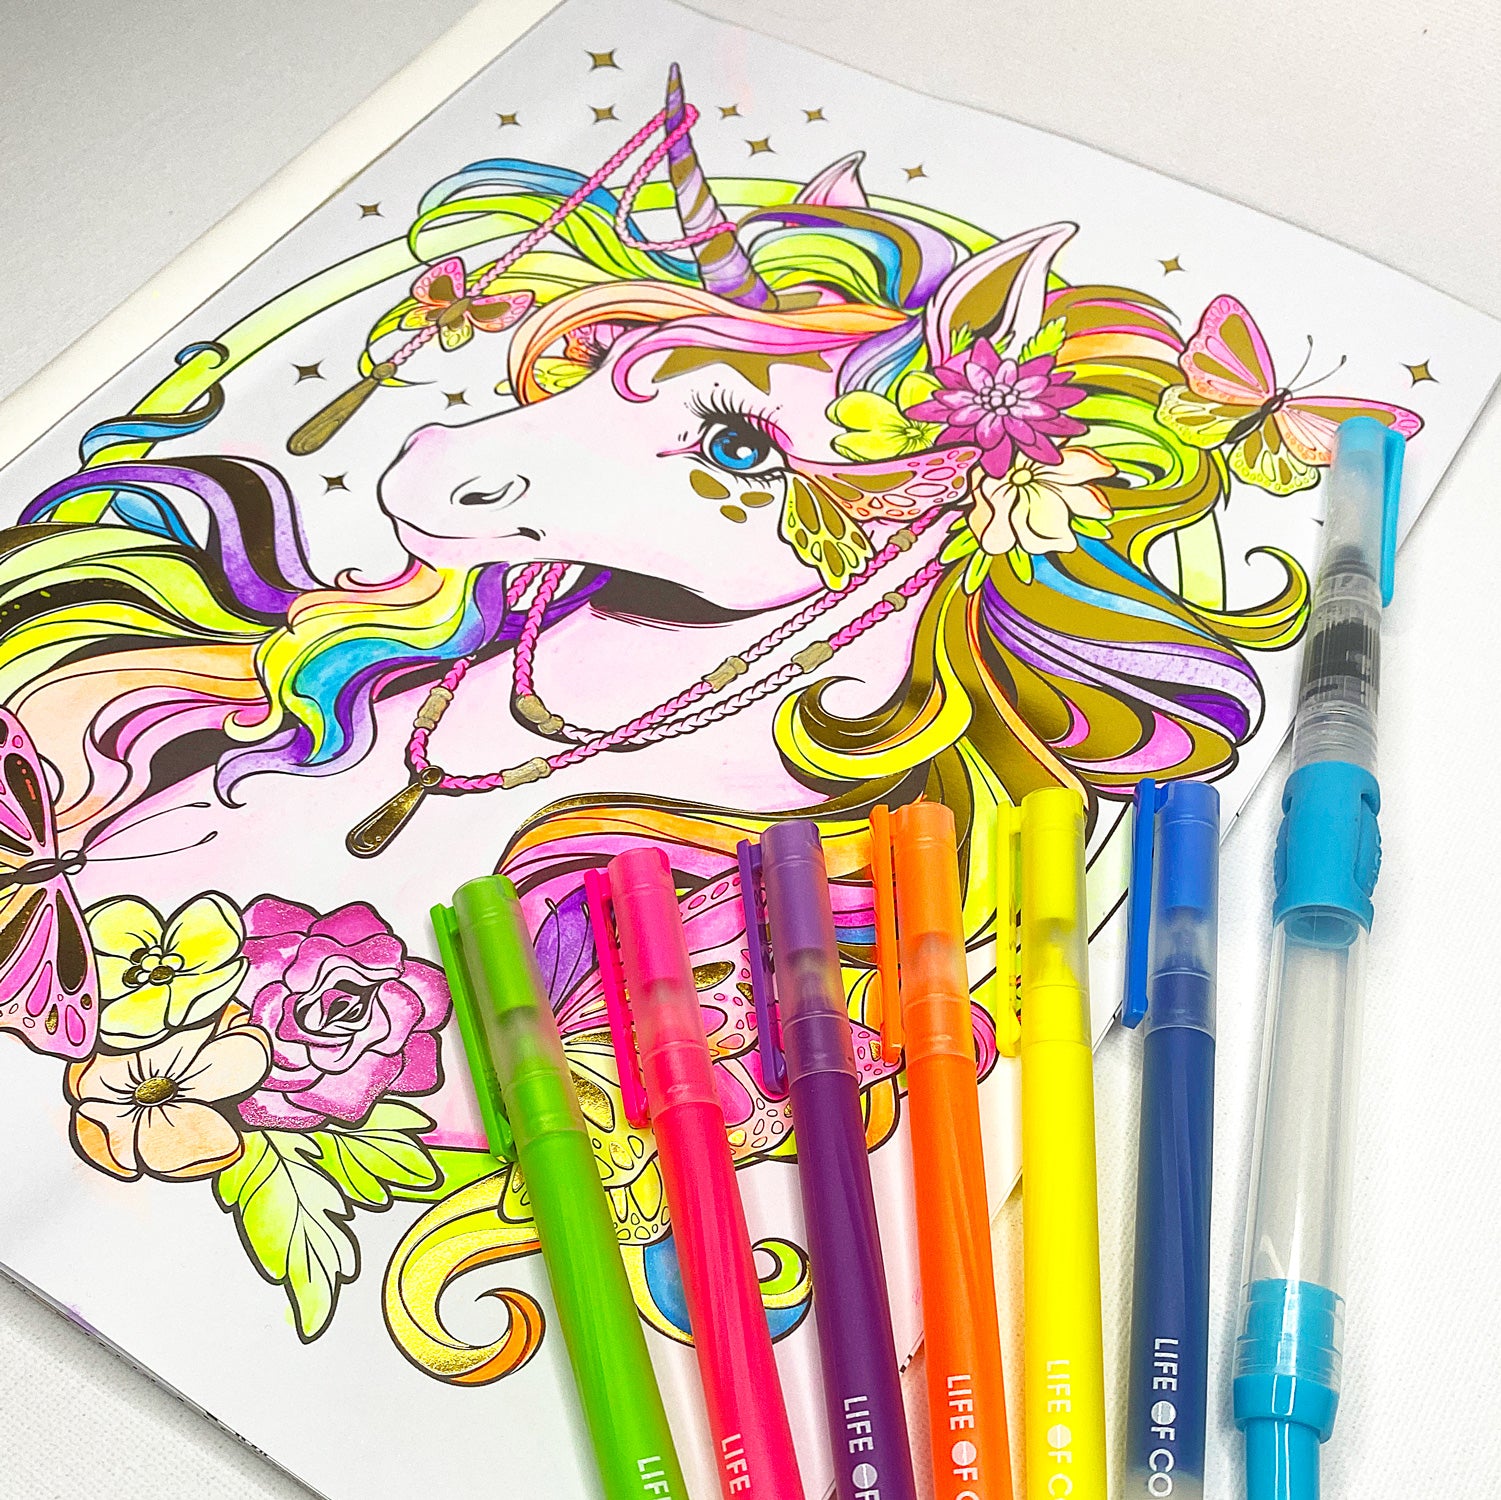 https://cdn.shopify.com/s/files/1/2374/1375/files/colouring-pages-gel-pens-lifeofcolour.jpg?v=1657234364